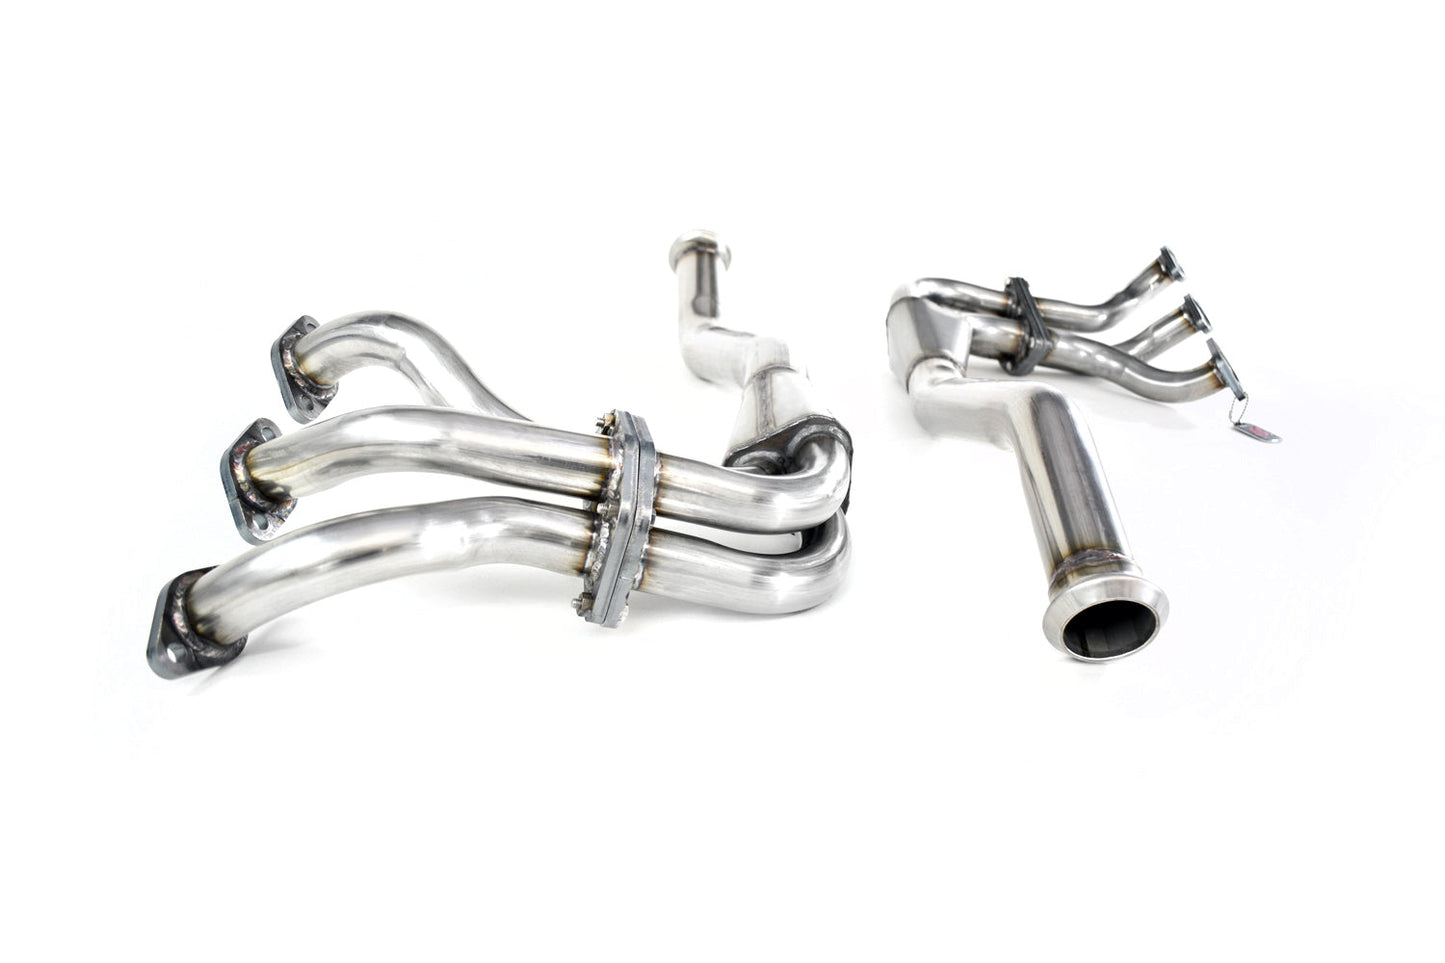 Citroen SM - Stainless Steel Front Pipes OR Manifolds (1970-75) - QuickSilver Exhausts